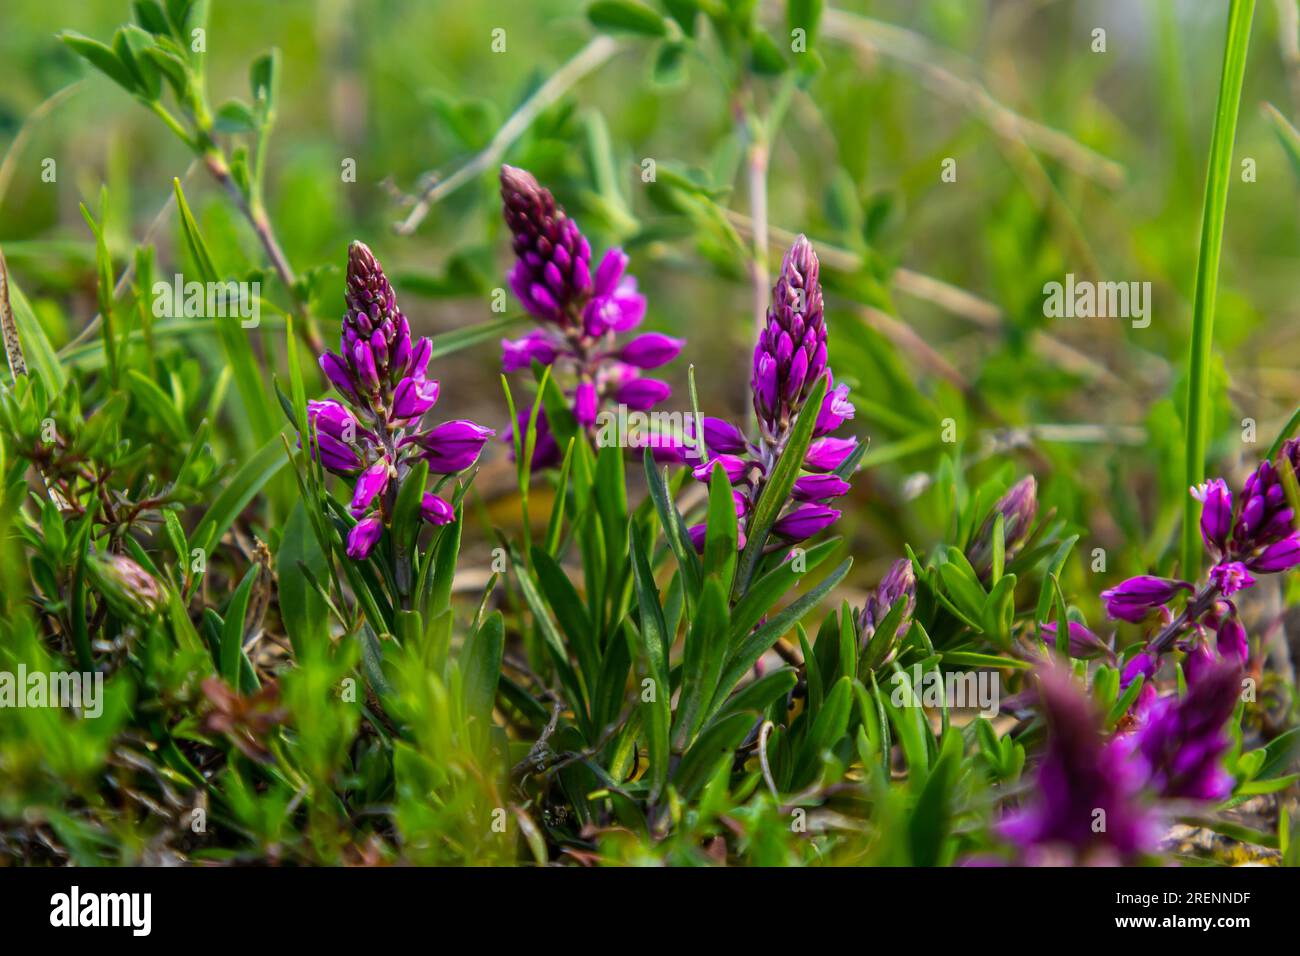 Polygala vulgaris, known as the common milkwort, is a herbaceous perennial plant of the family Polygalaceae. Polygala vulgaris subsp. oxyptera, Polyga Stock Photo